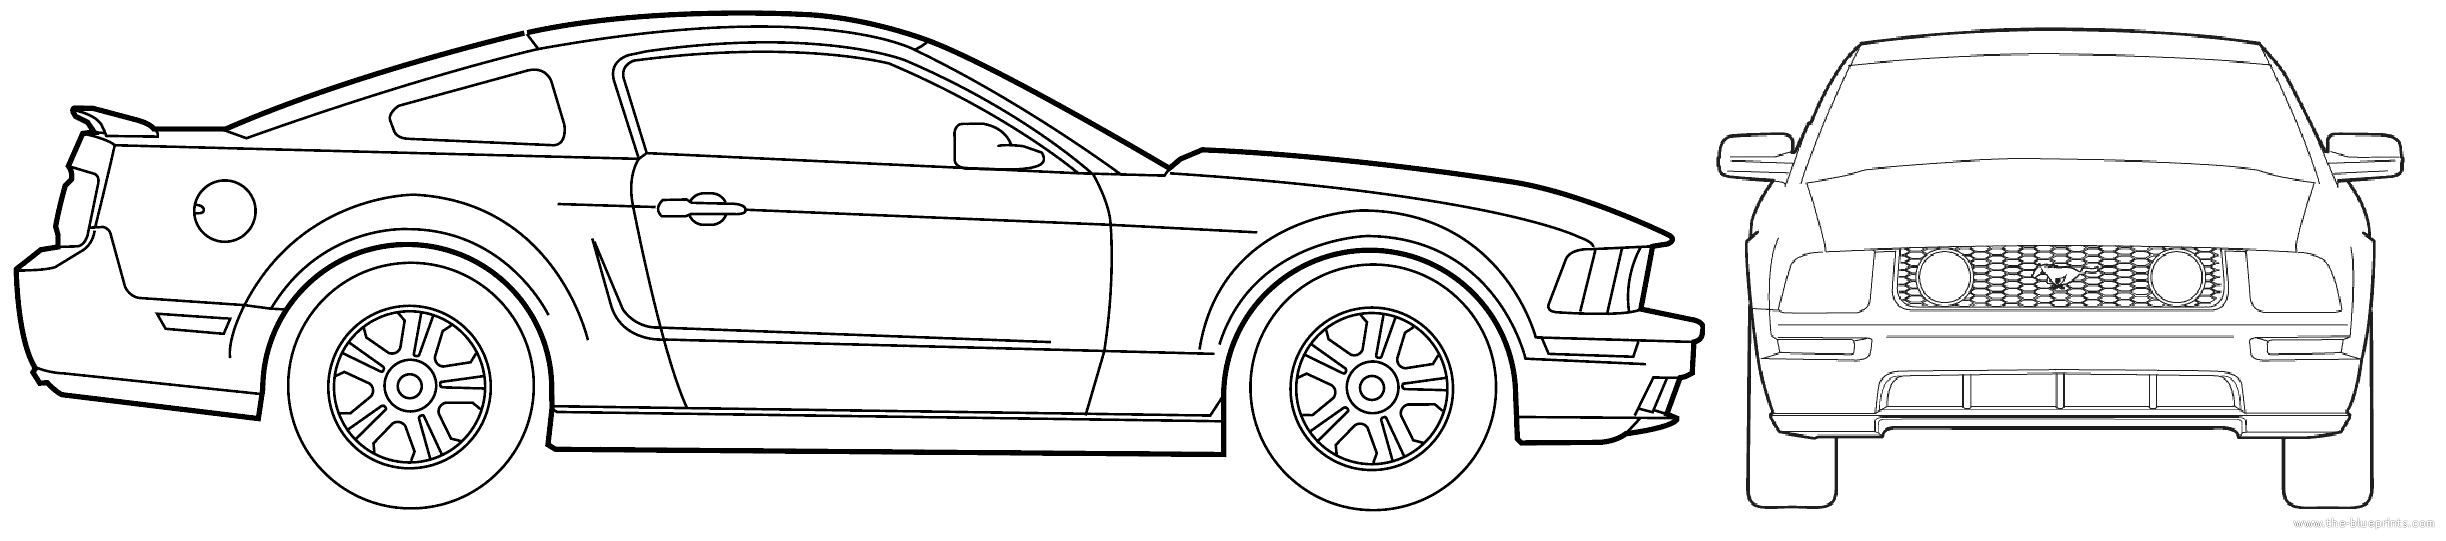 Ford mustang 2010 blueprints #3